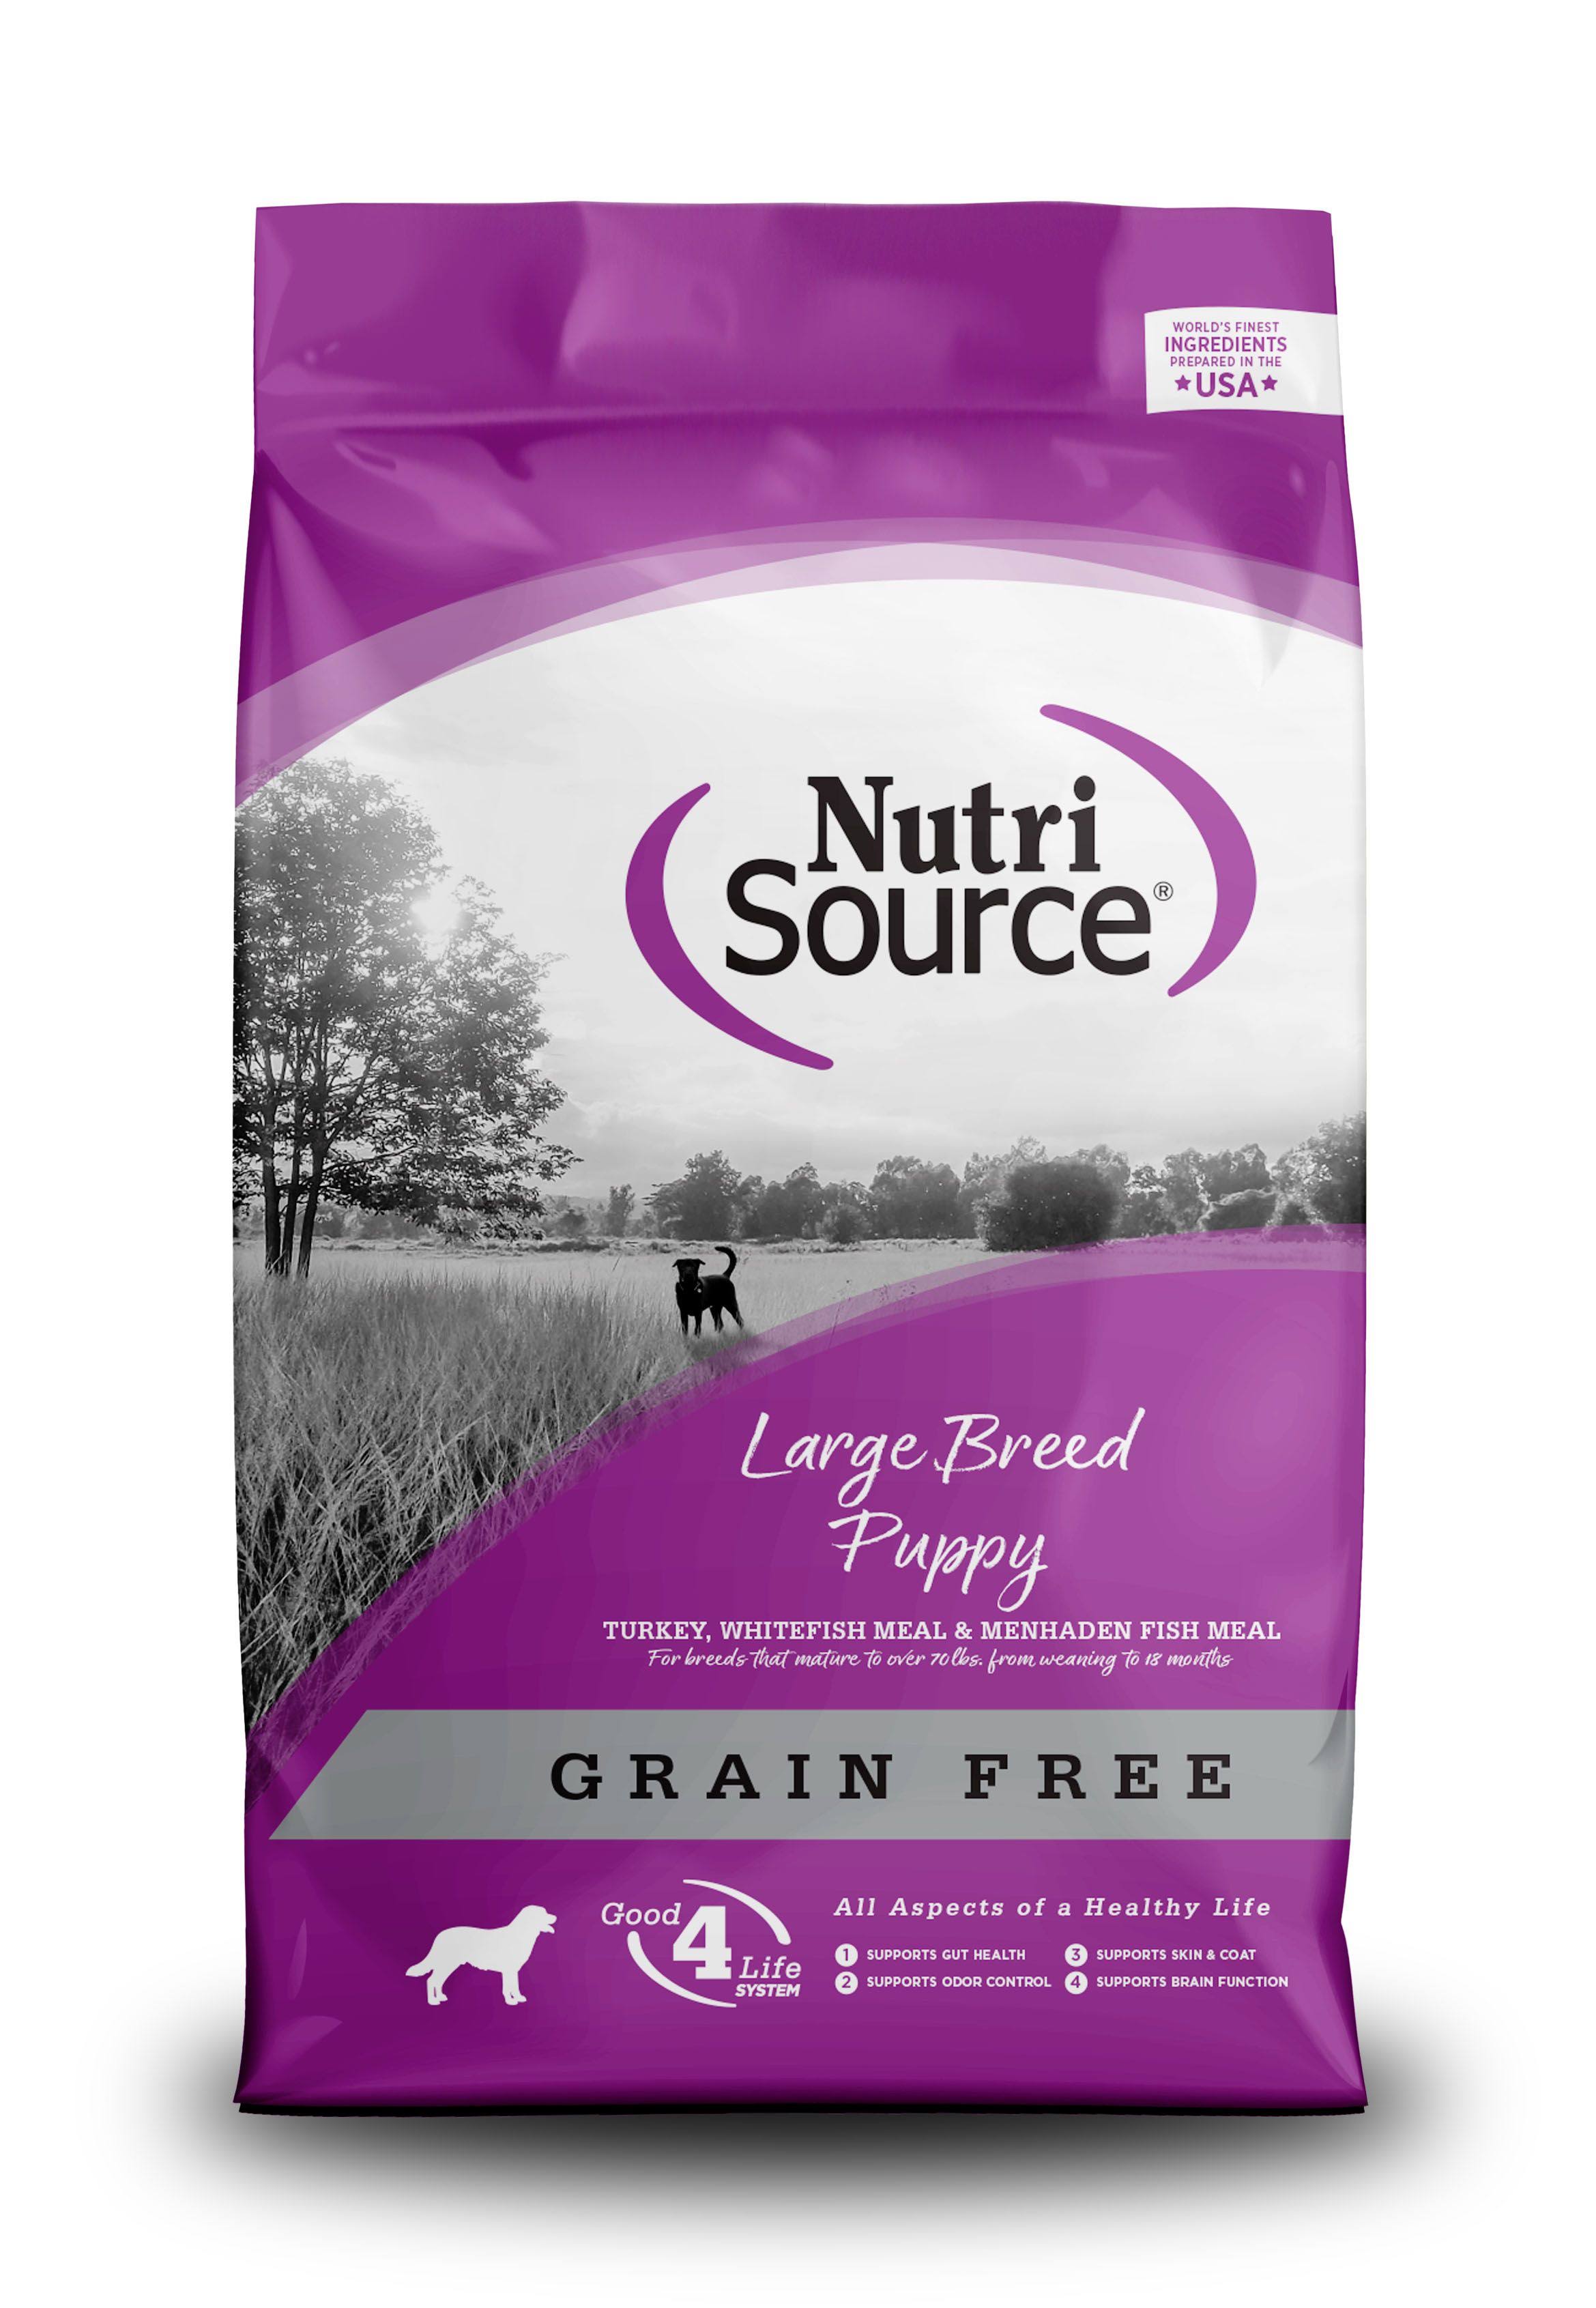 NutriSource Grain Free Large Breed Puppy Dog Food 5 lbs